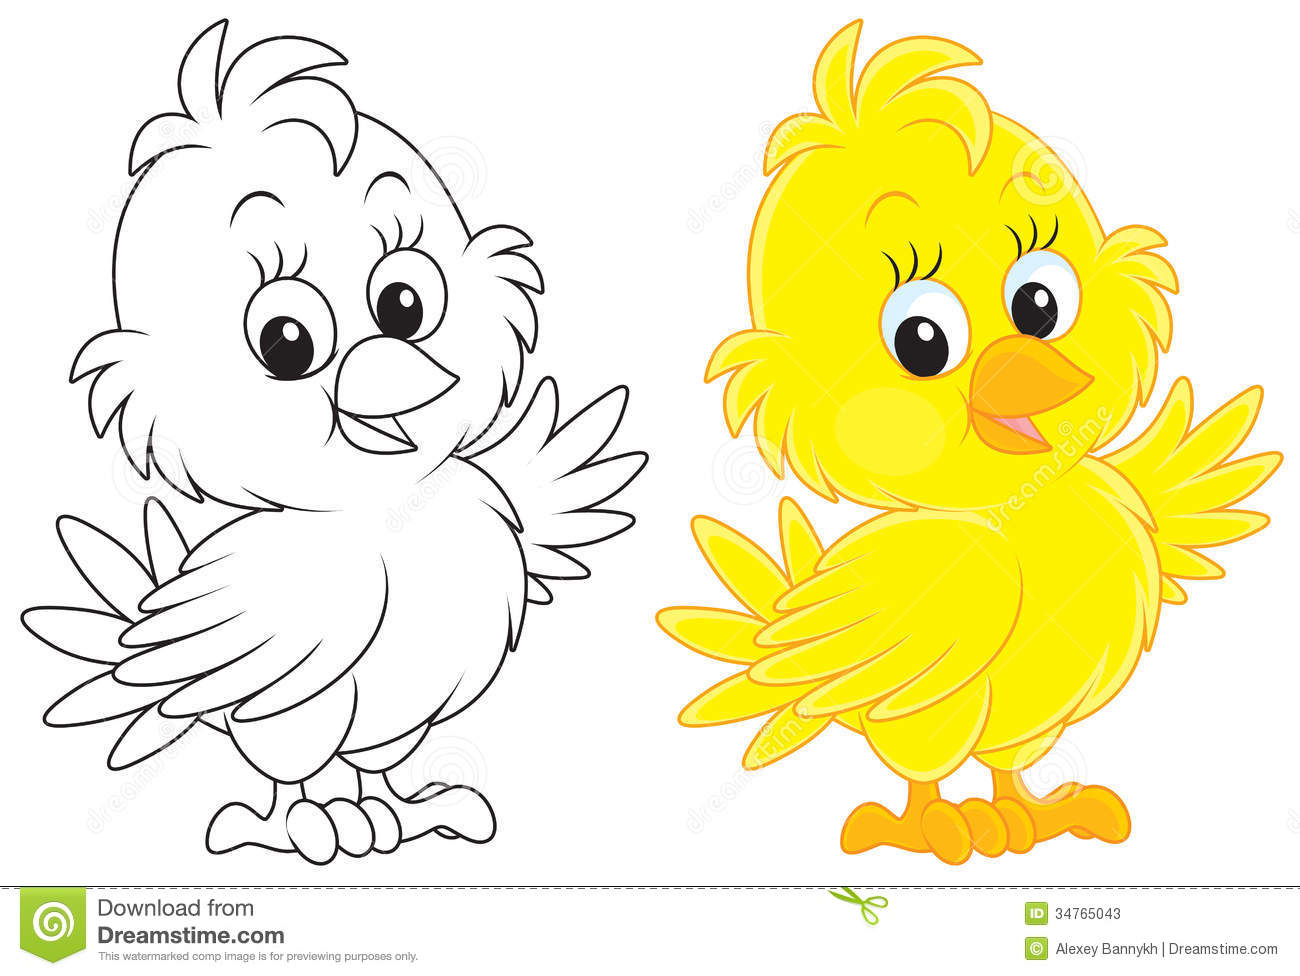 Little Yellow Chick Color And Black And White Outline Illustrations